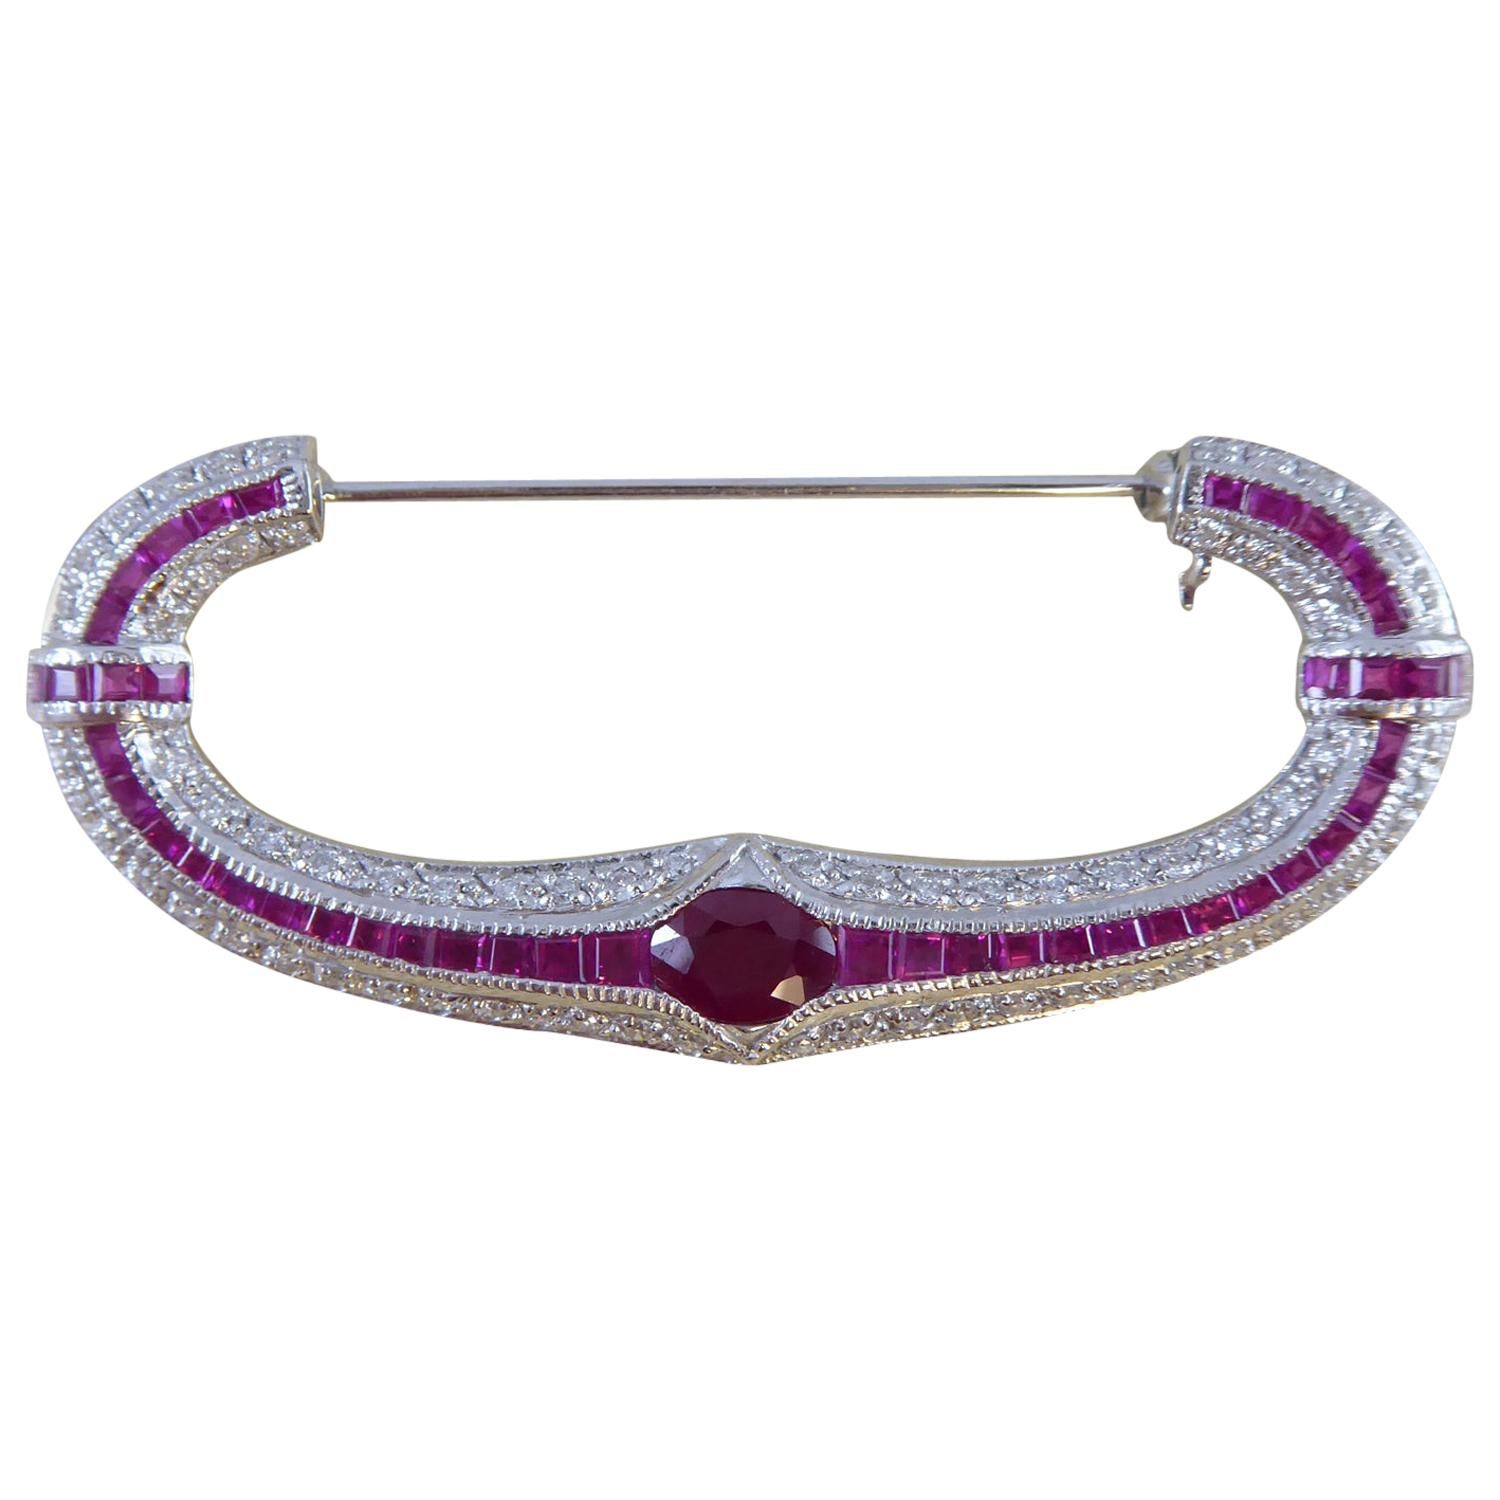 1.70 Carat Ruby and Diamond Modern Brooch in Crescent Style, 18 Carat White Gold